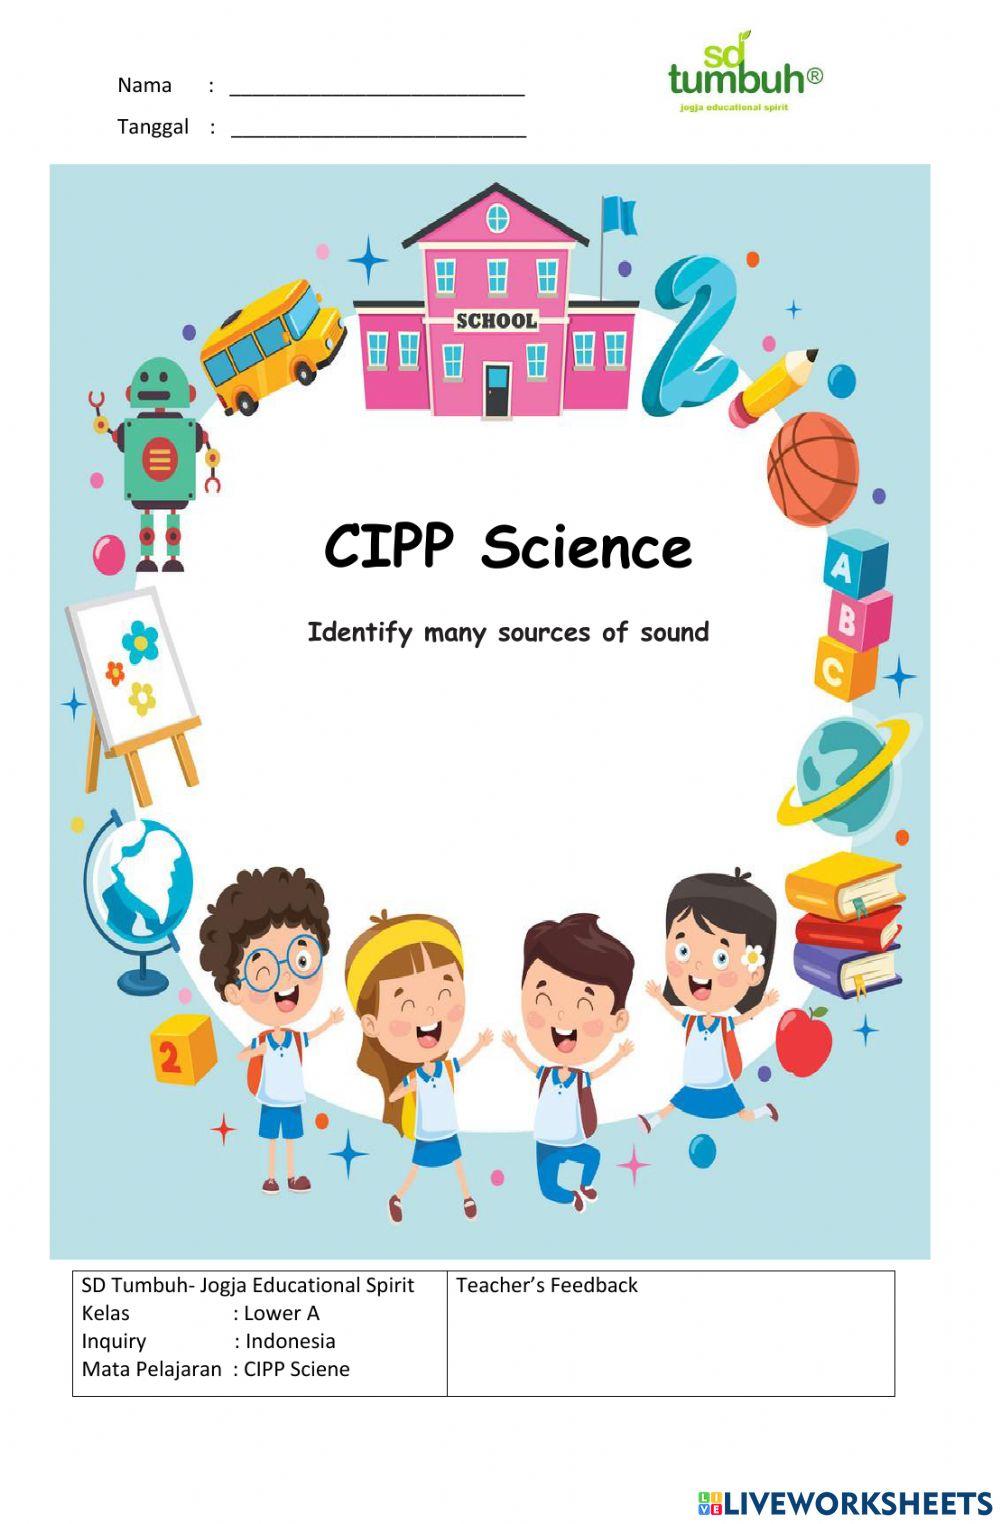 CIPP Science-Playing games gues sound